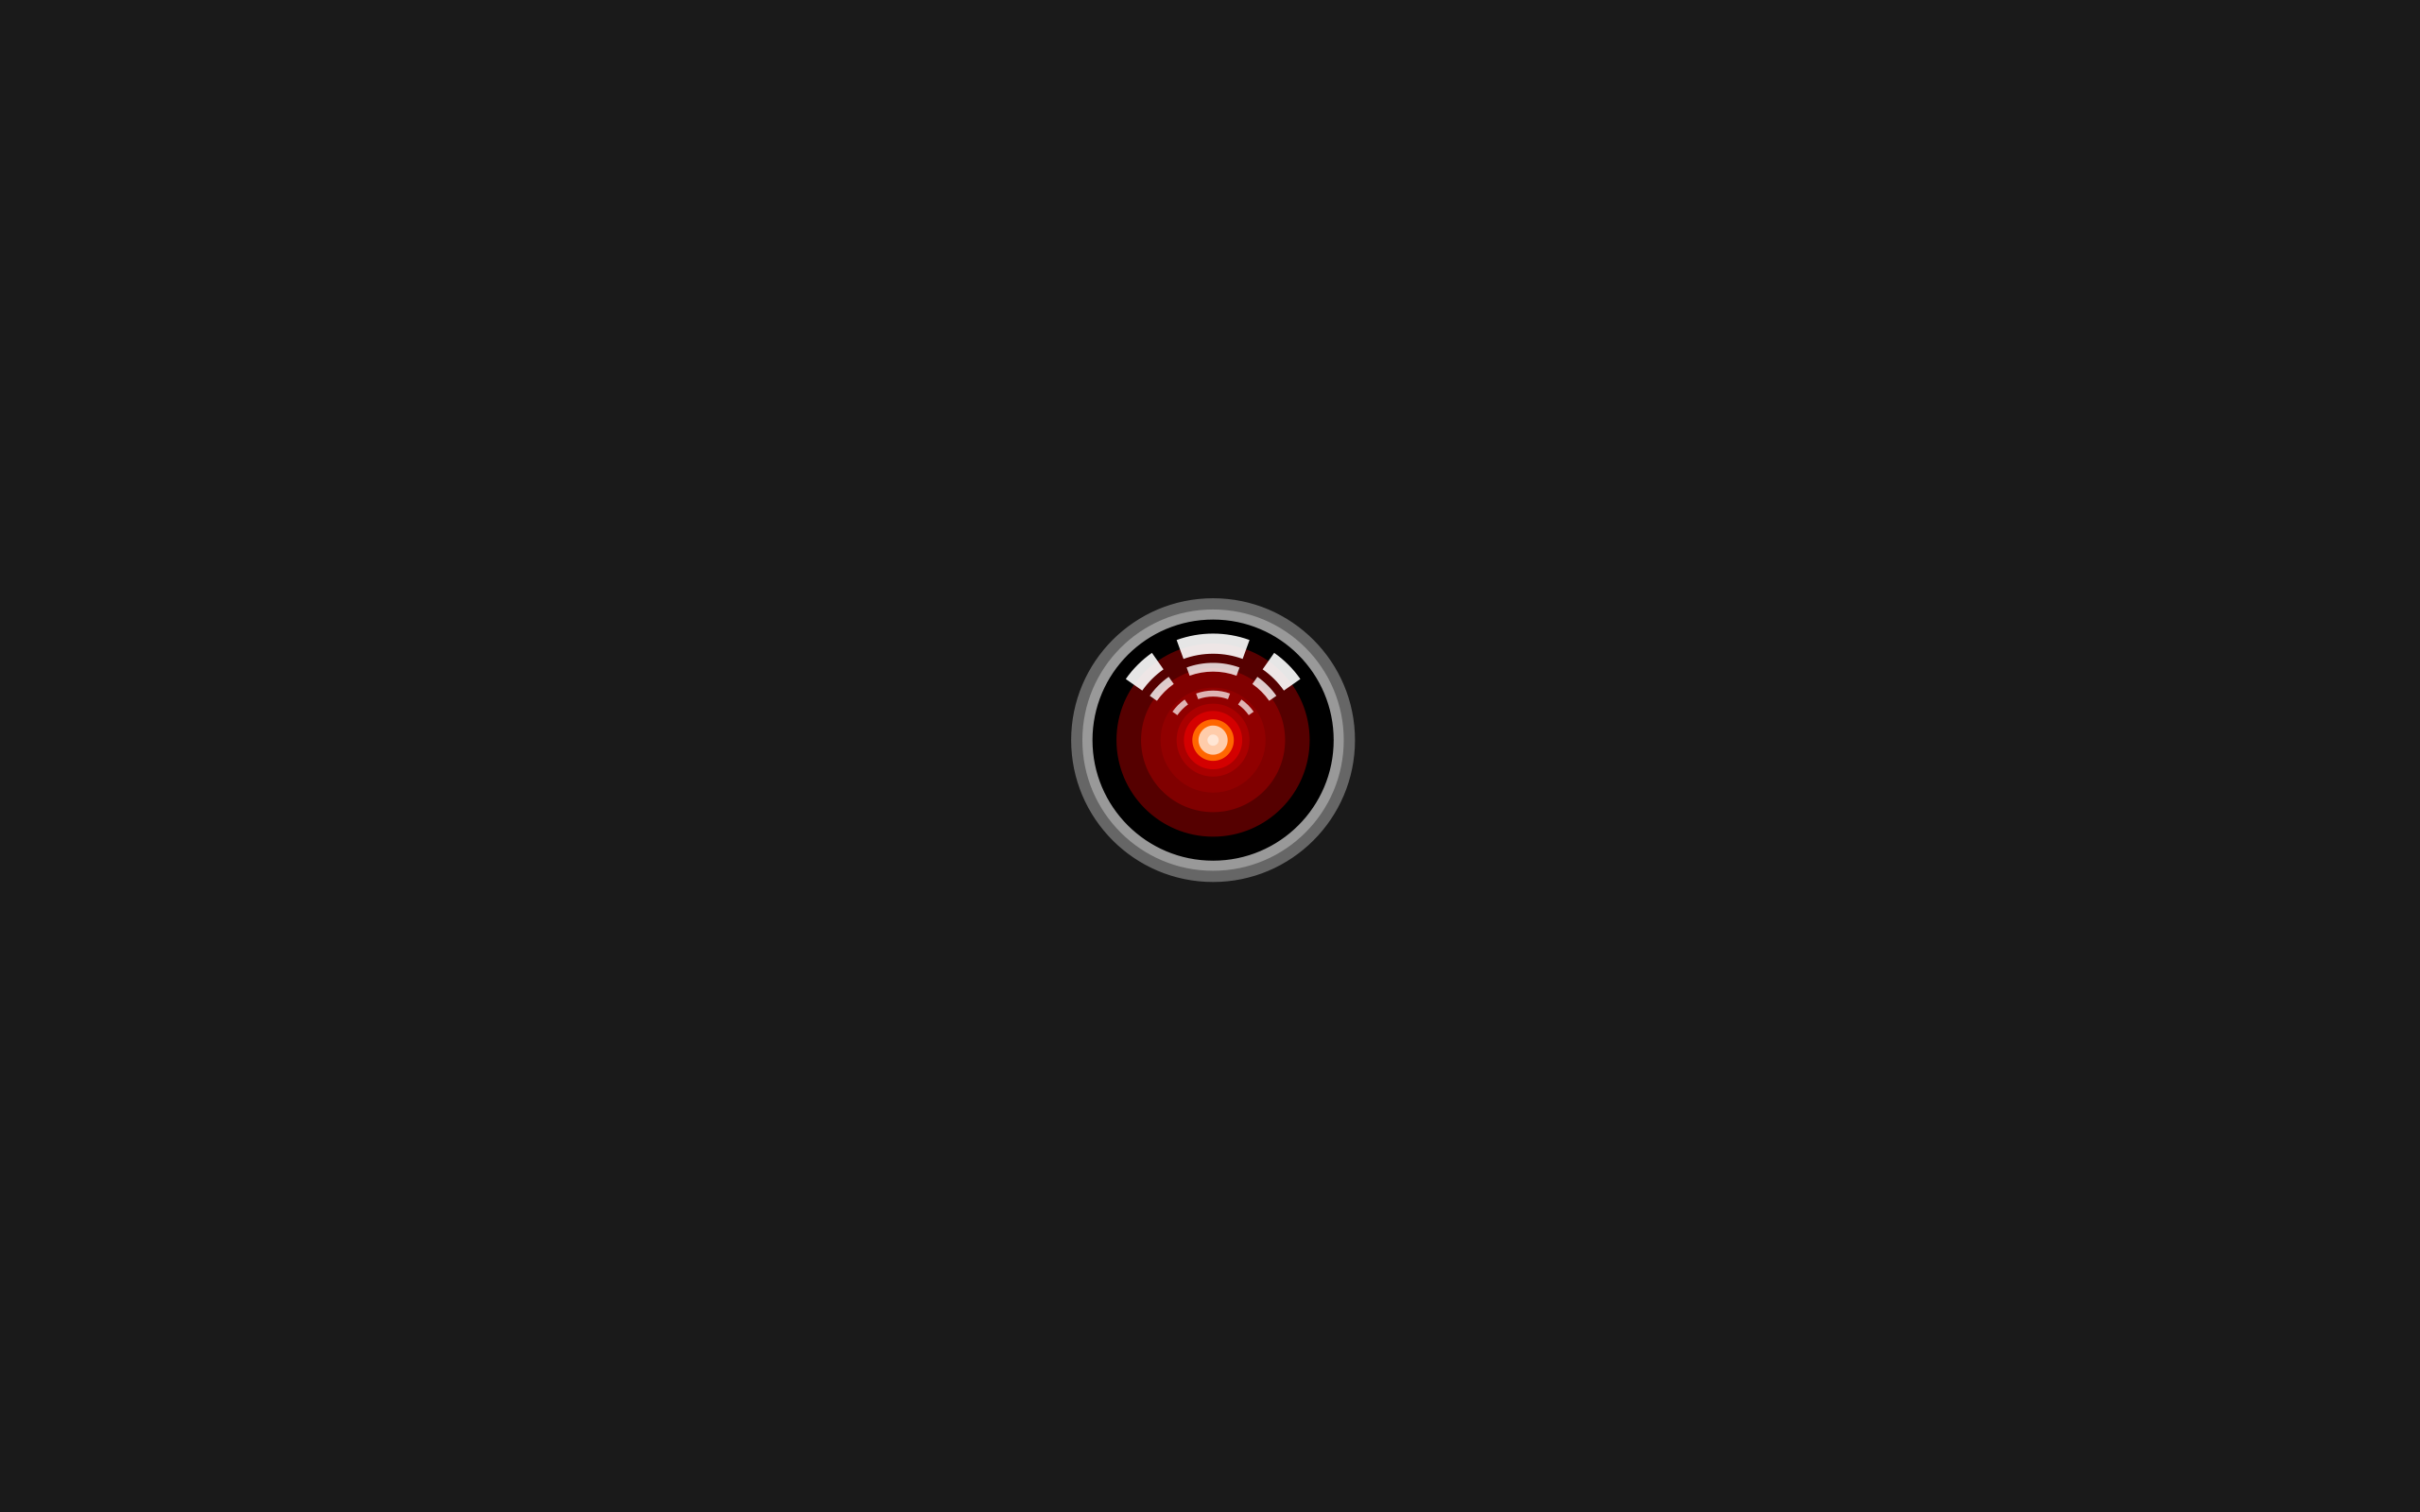 2001 Wallpaper: A Space Odyssey